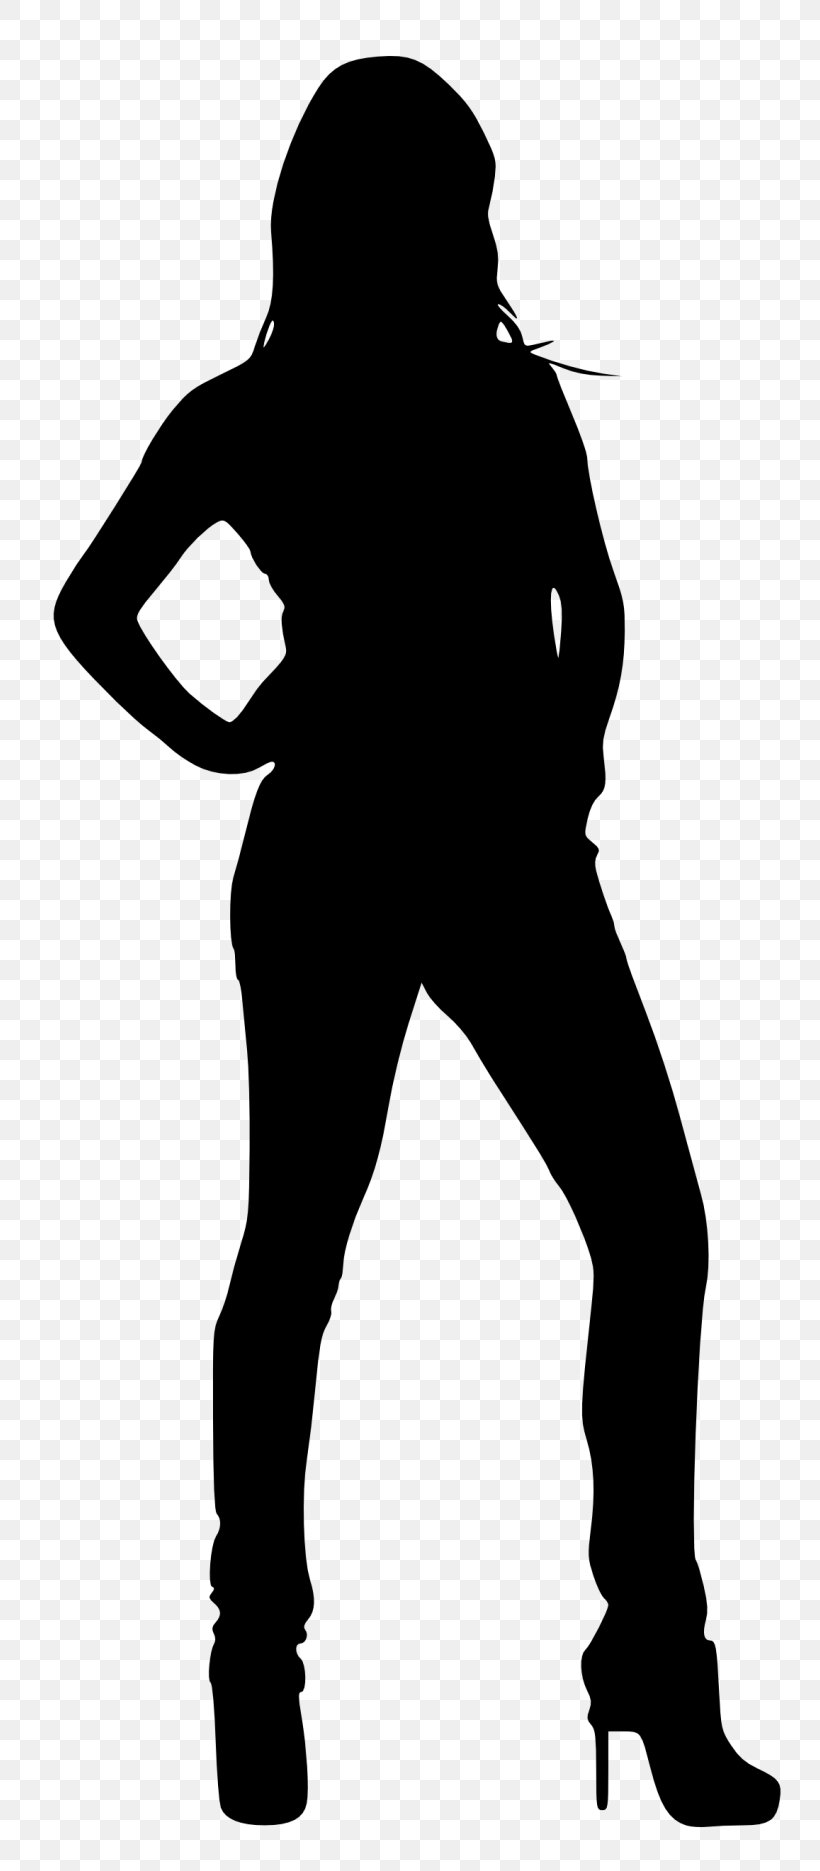 Silhouette Woman Clip Art, PNG, 768x1871px, Silhouette, Arm, Art, Black, Black And White Download Free